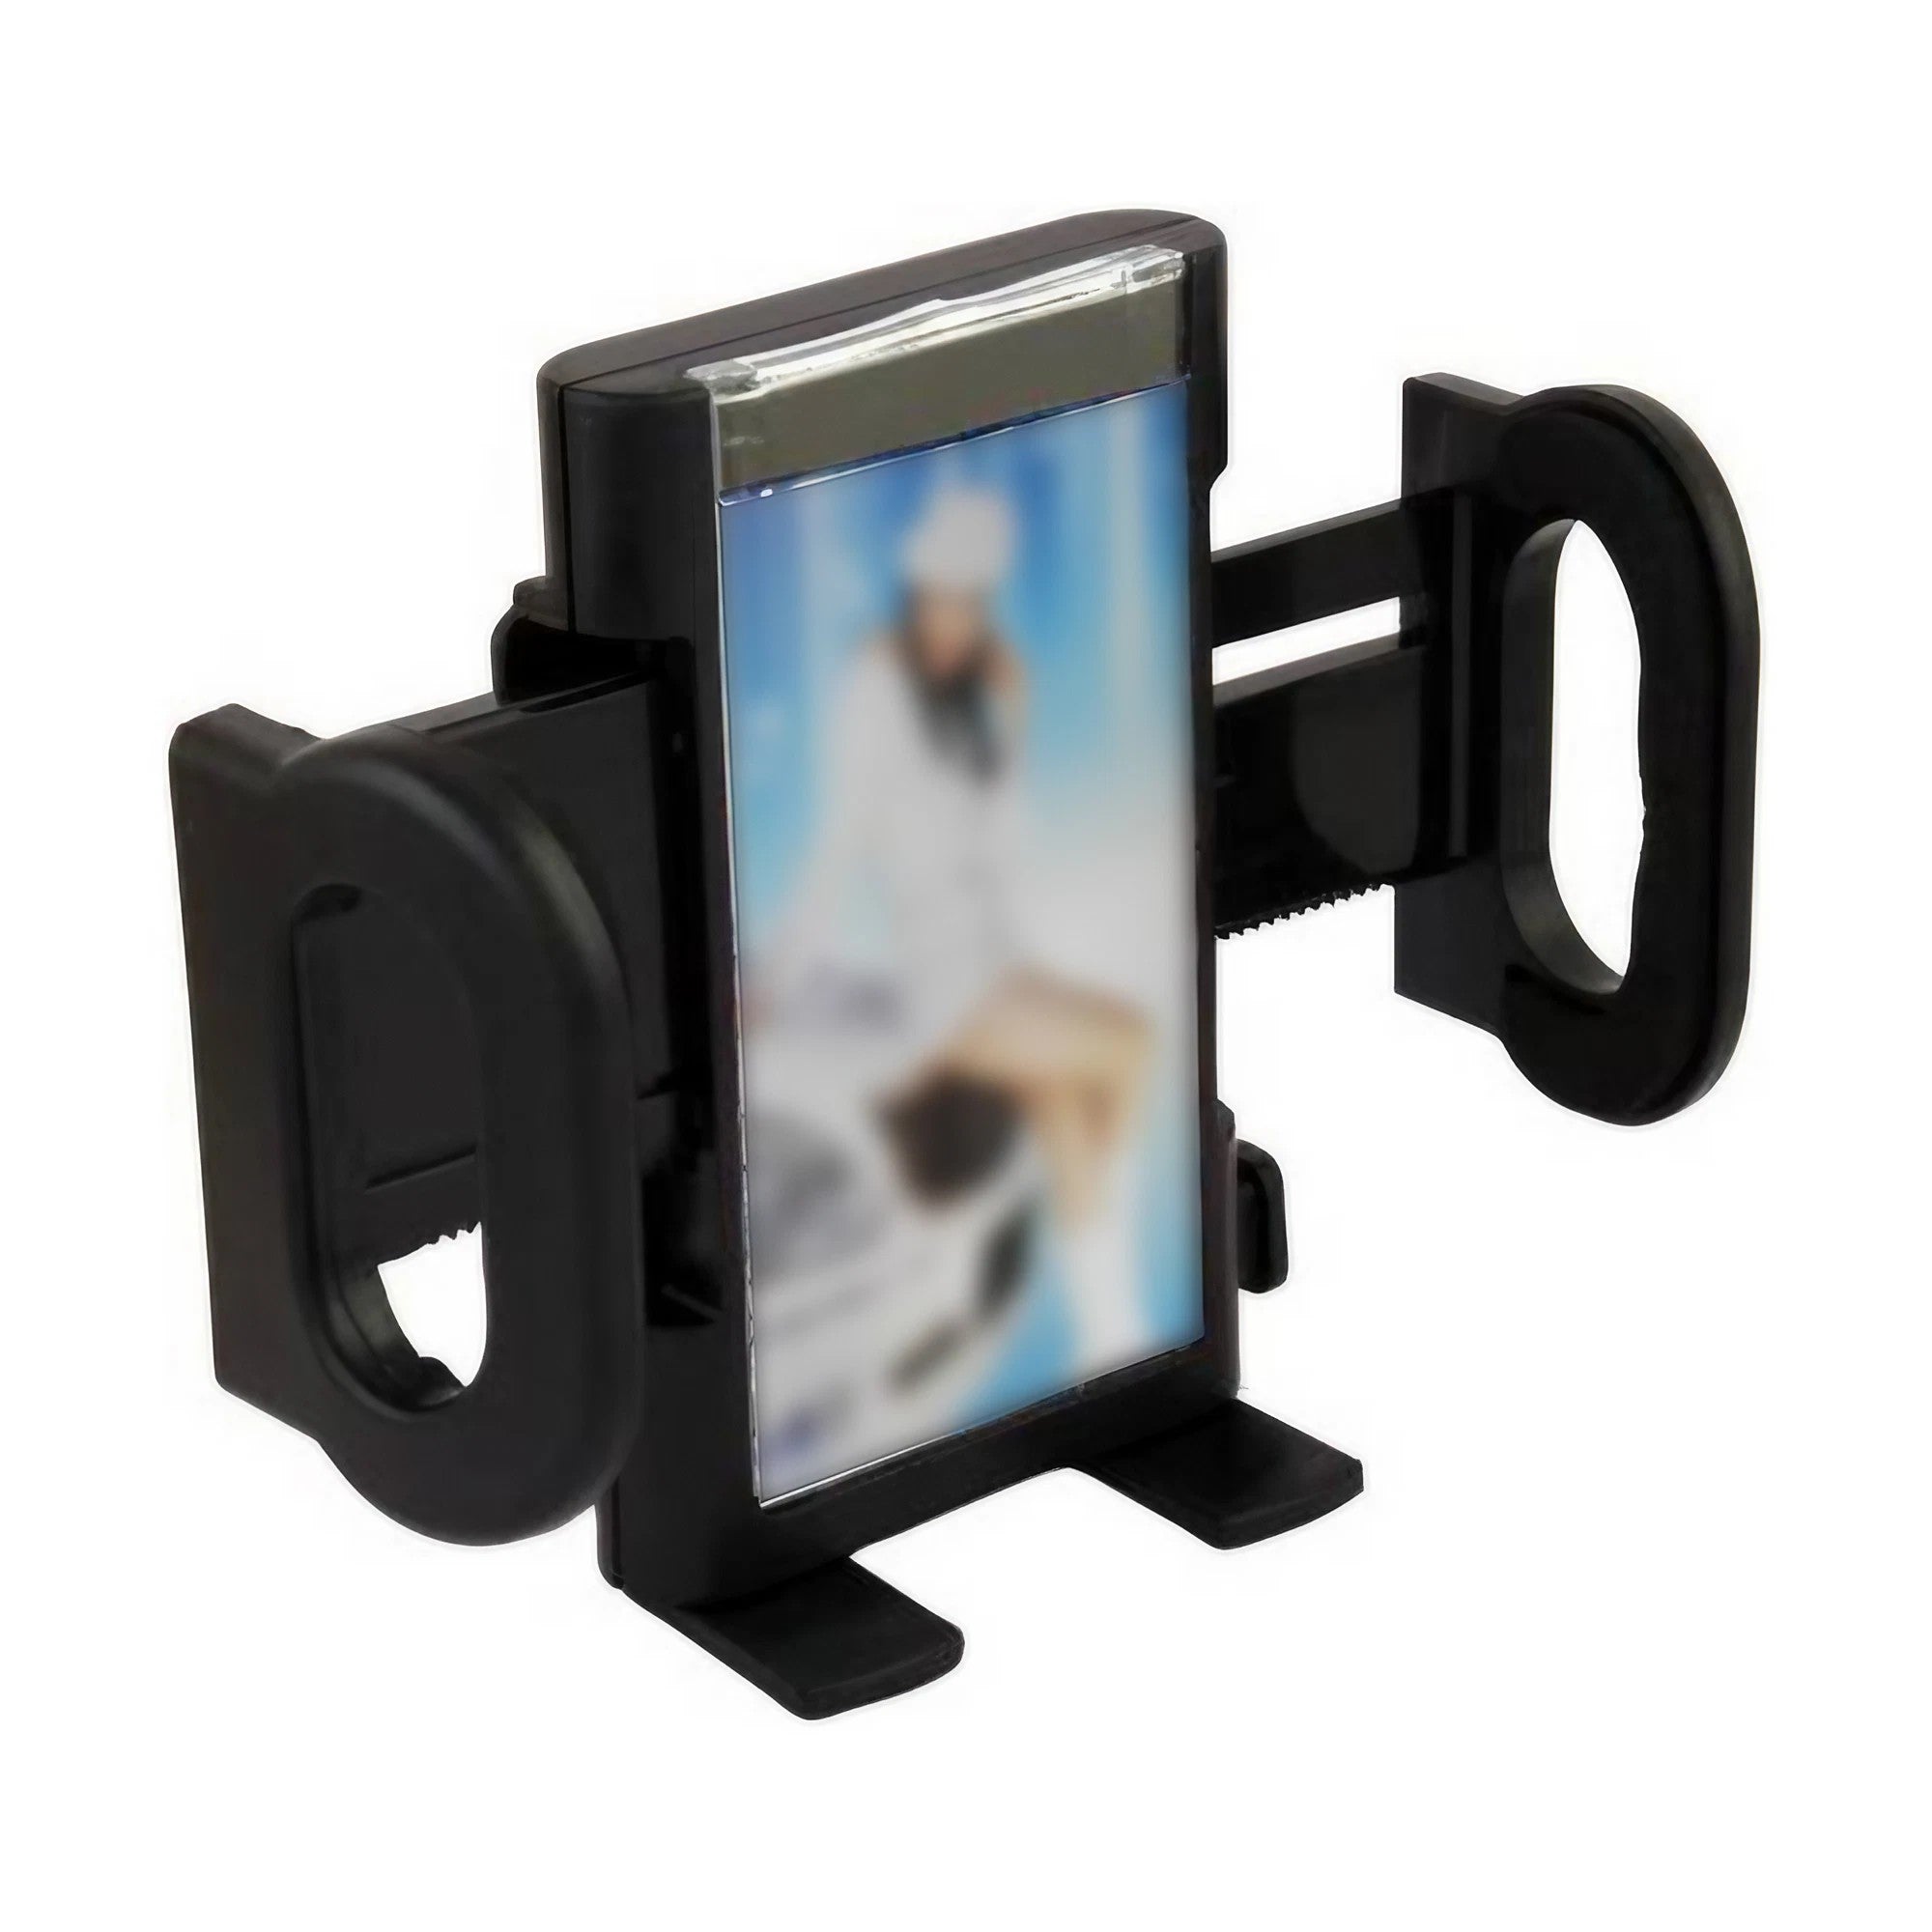 Car Universal Holder For Mobile Phones, PDA, MP3, MP4